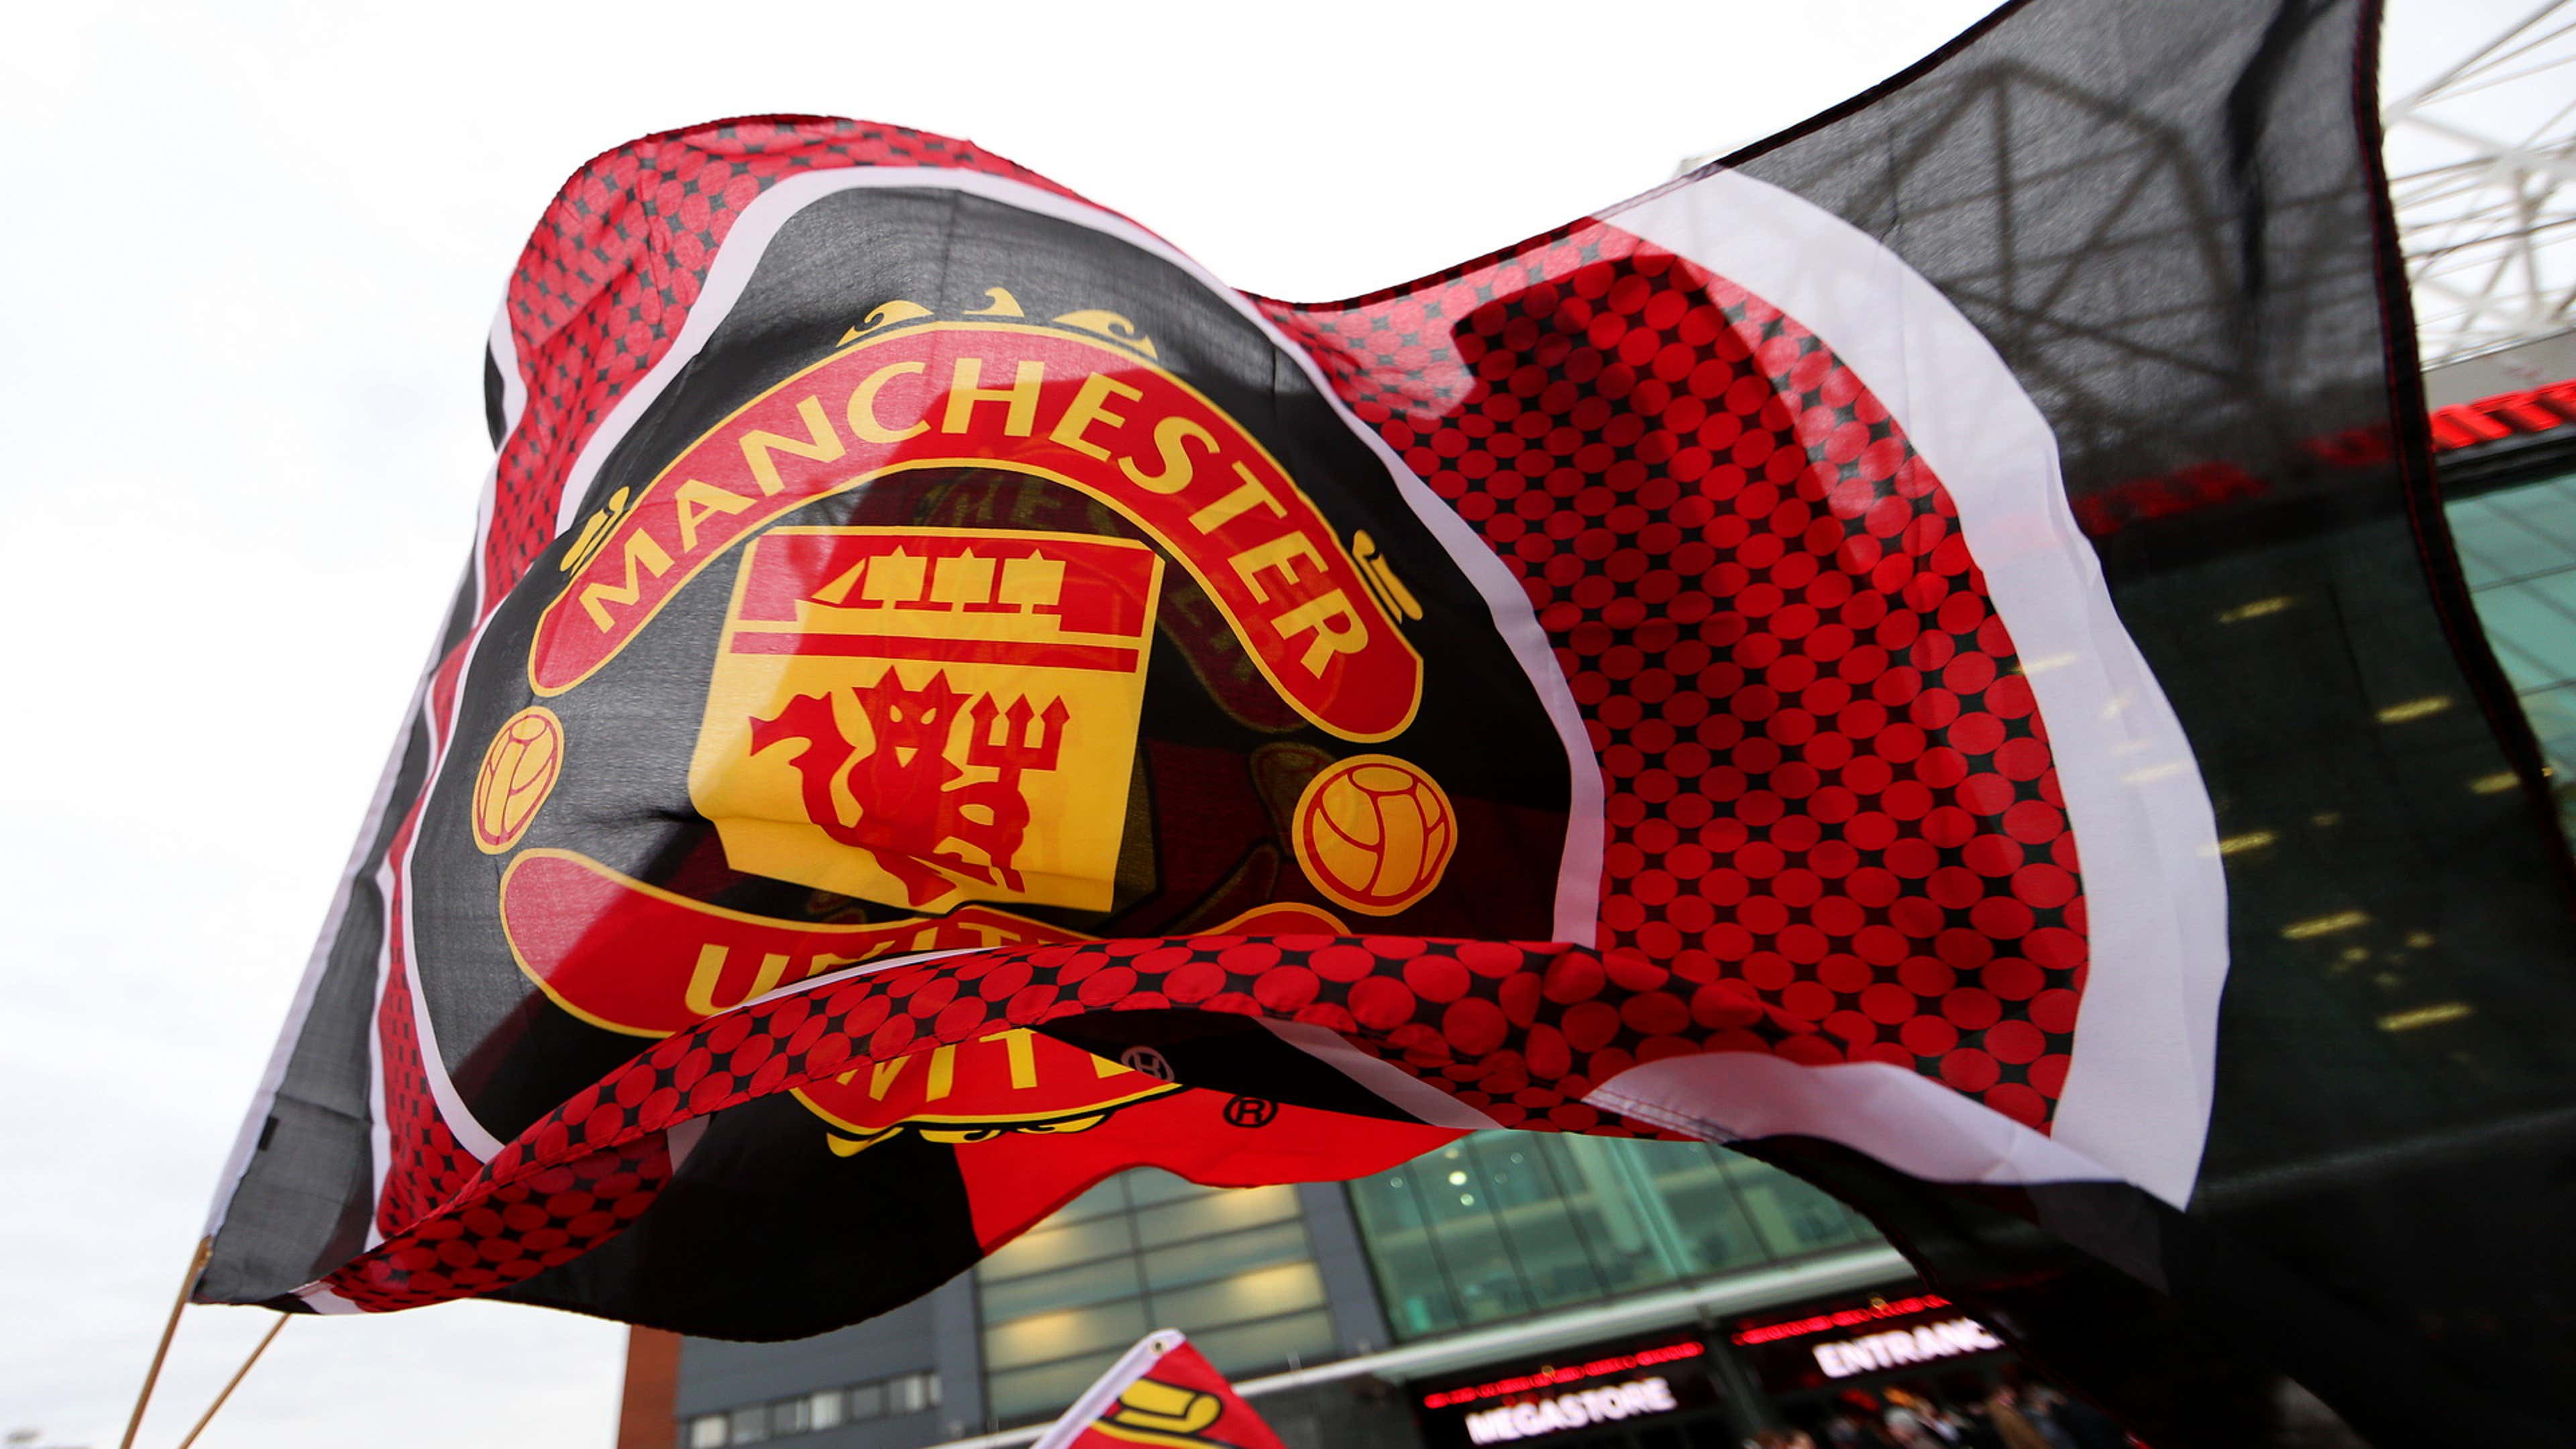 Manchester United Flag In Old Trafford